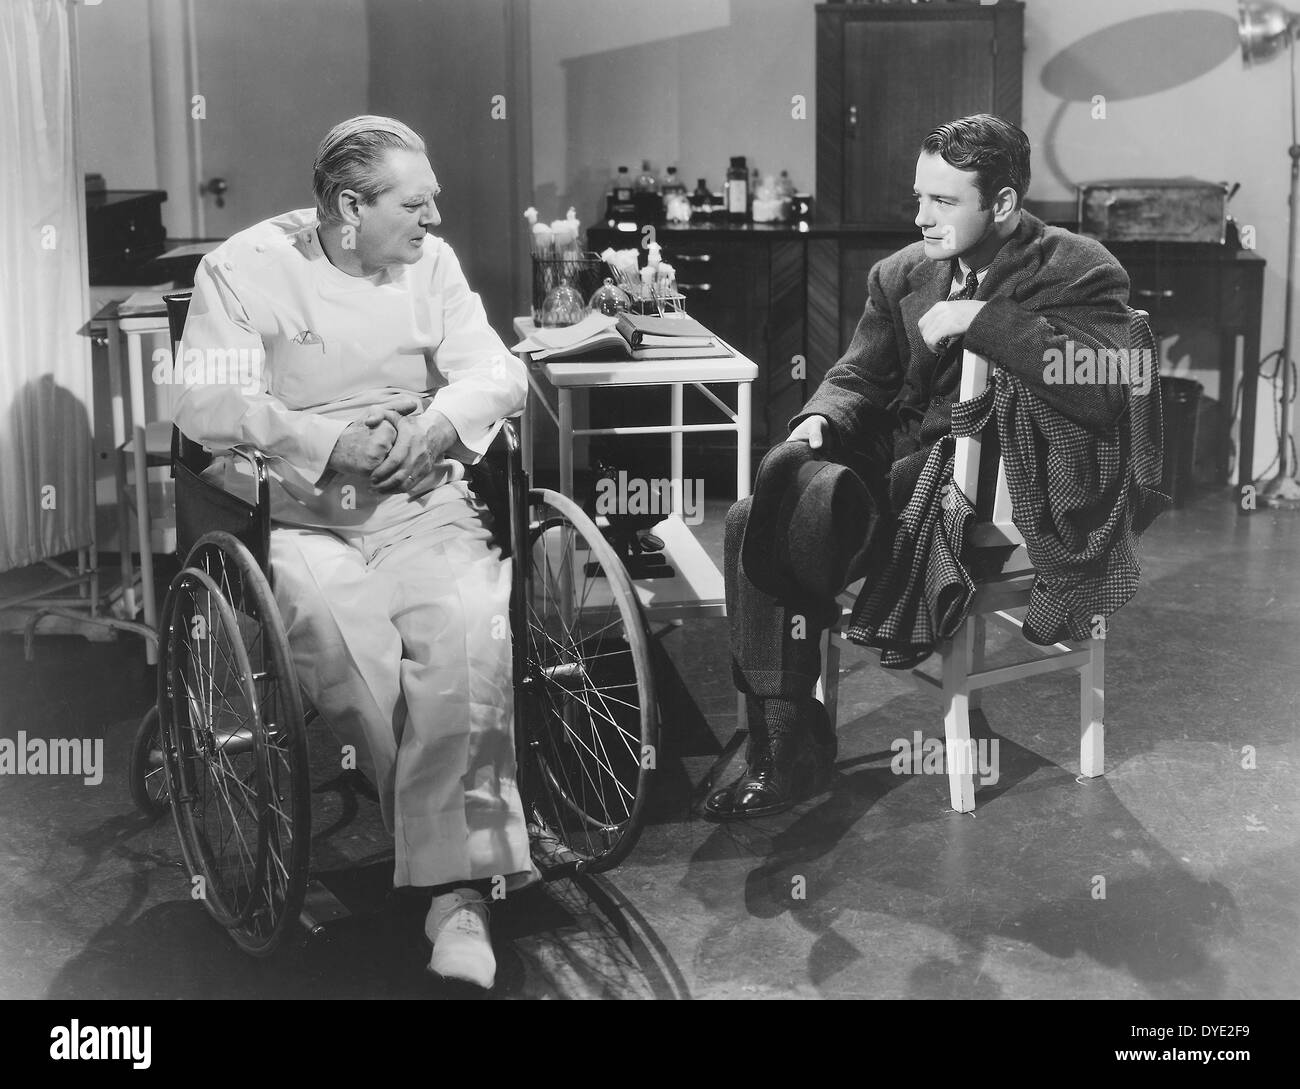 Wheelchair actor Stock Photos and Images